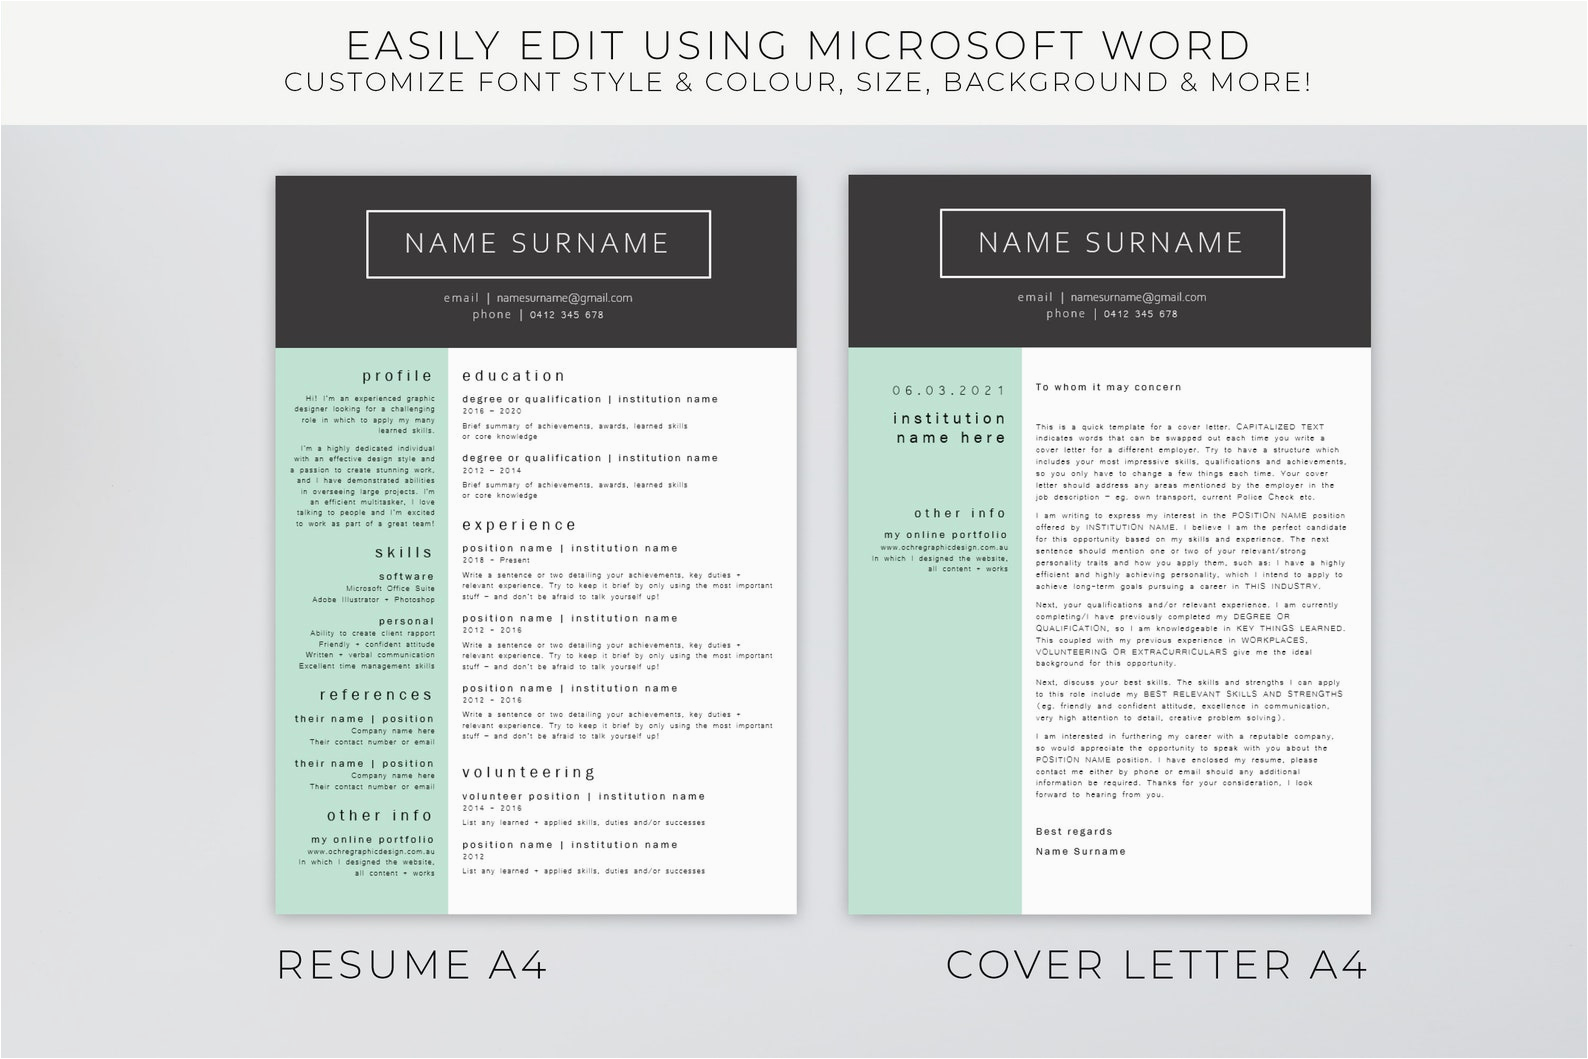 Resume Sample when You Have Green Card Sage Green & Charcoal Minimal Chic Resume Template Design with